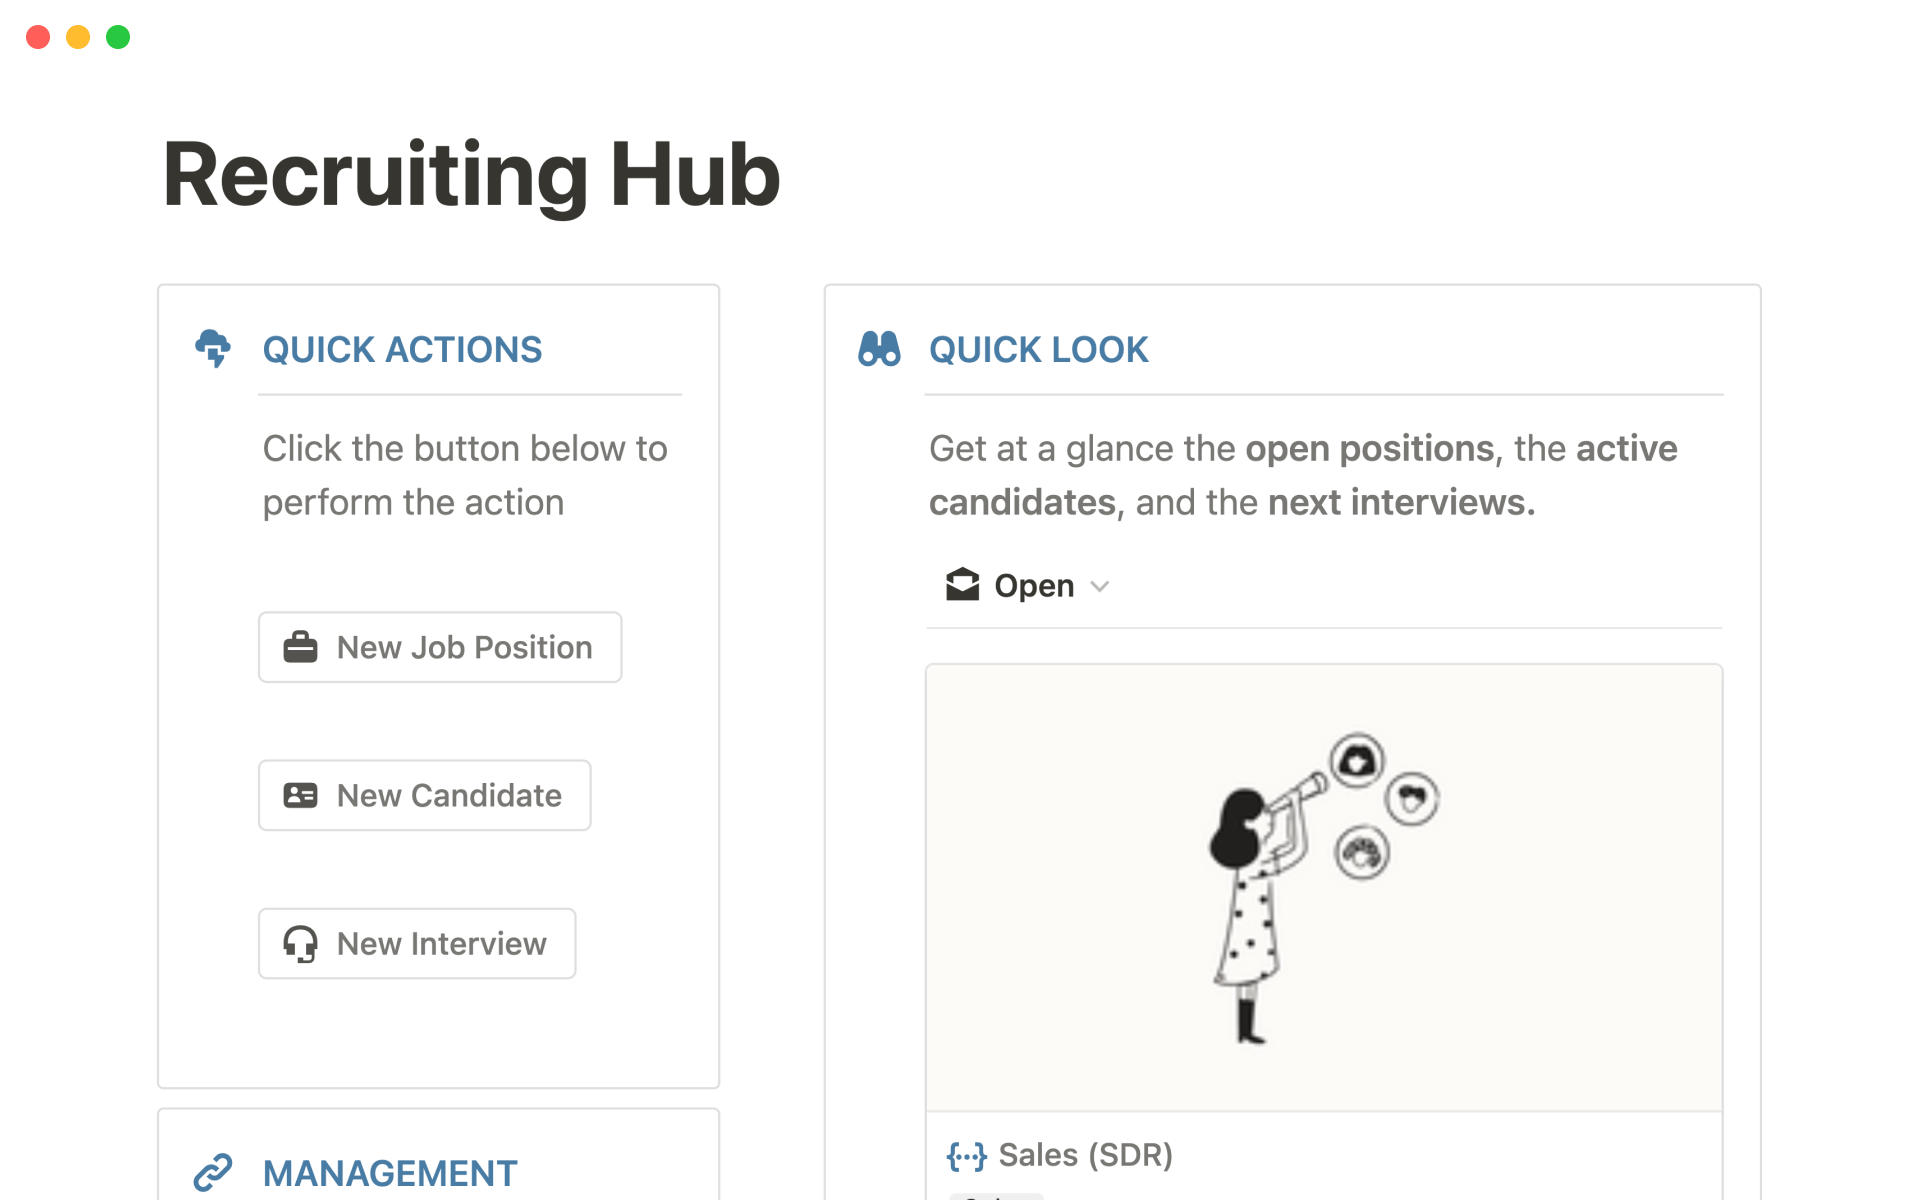 Manage your recruitments in Notion with the power of Notion AI